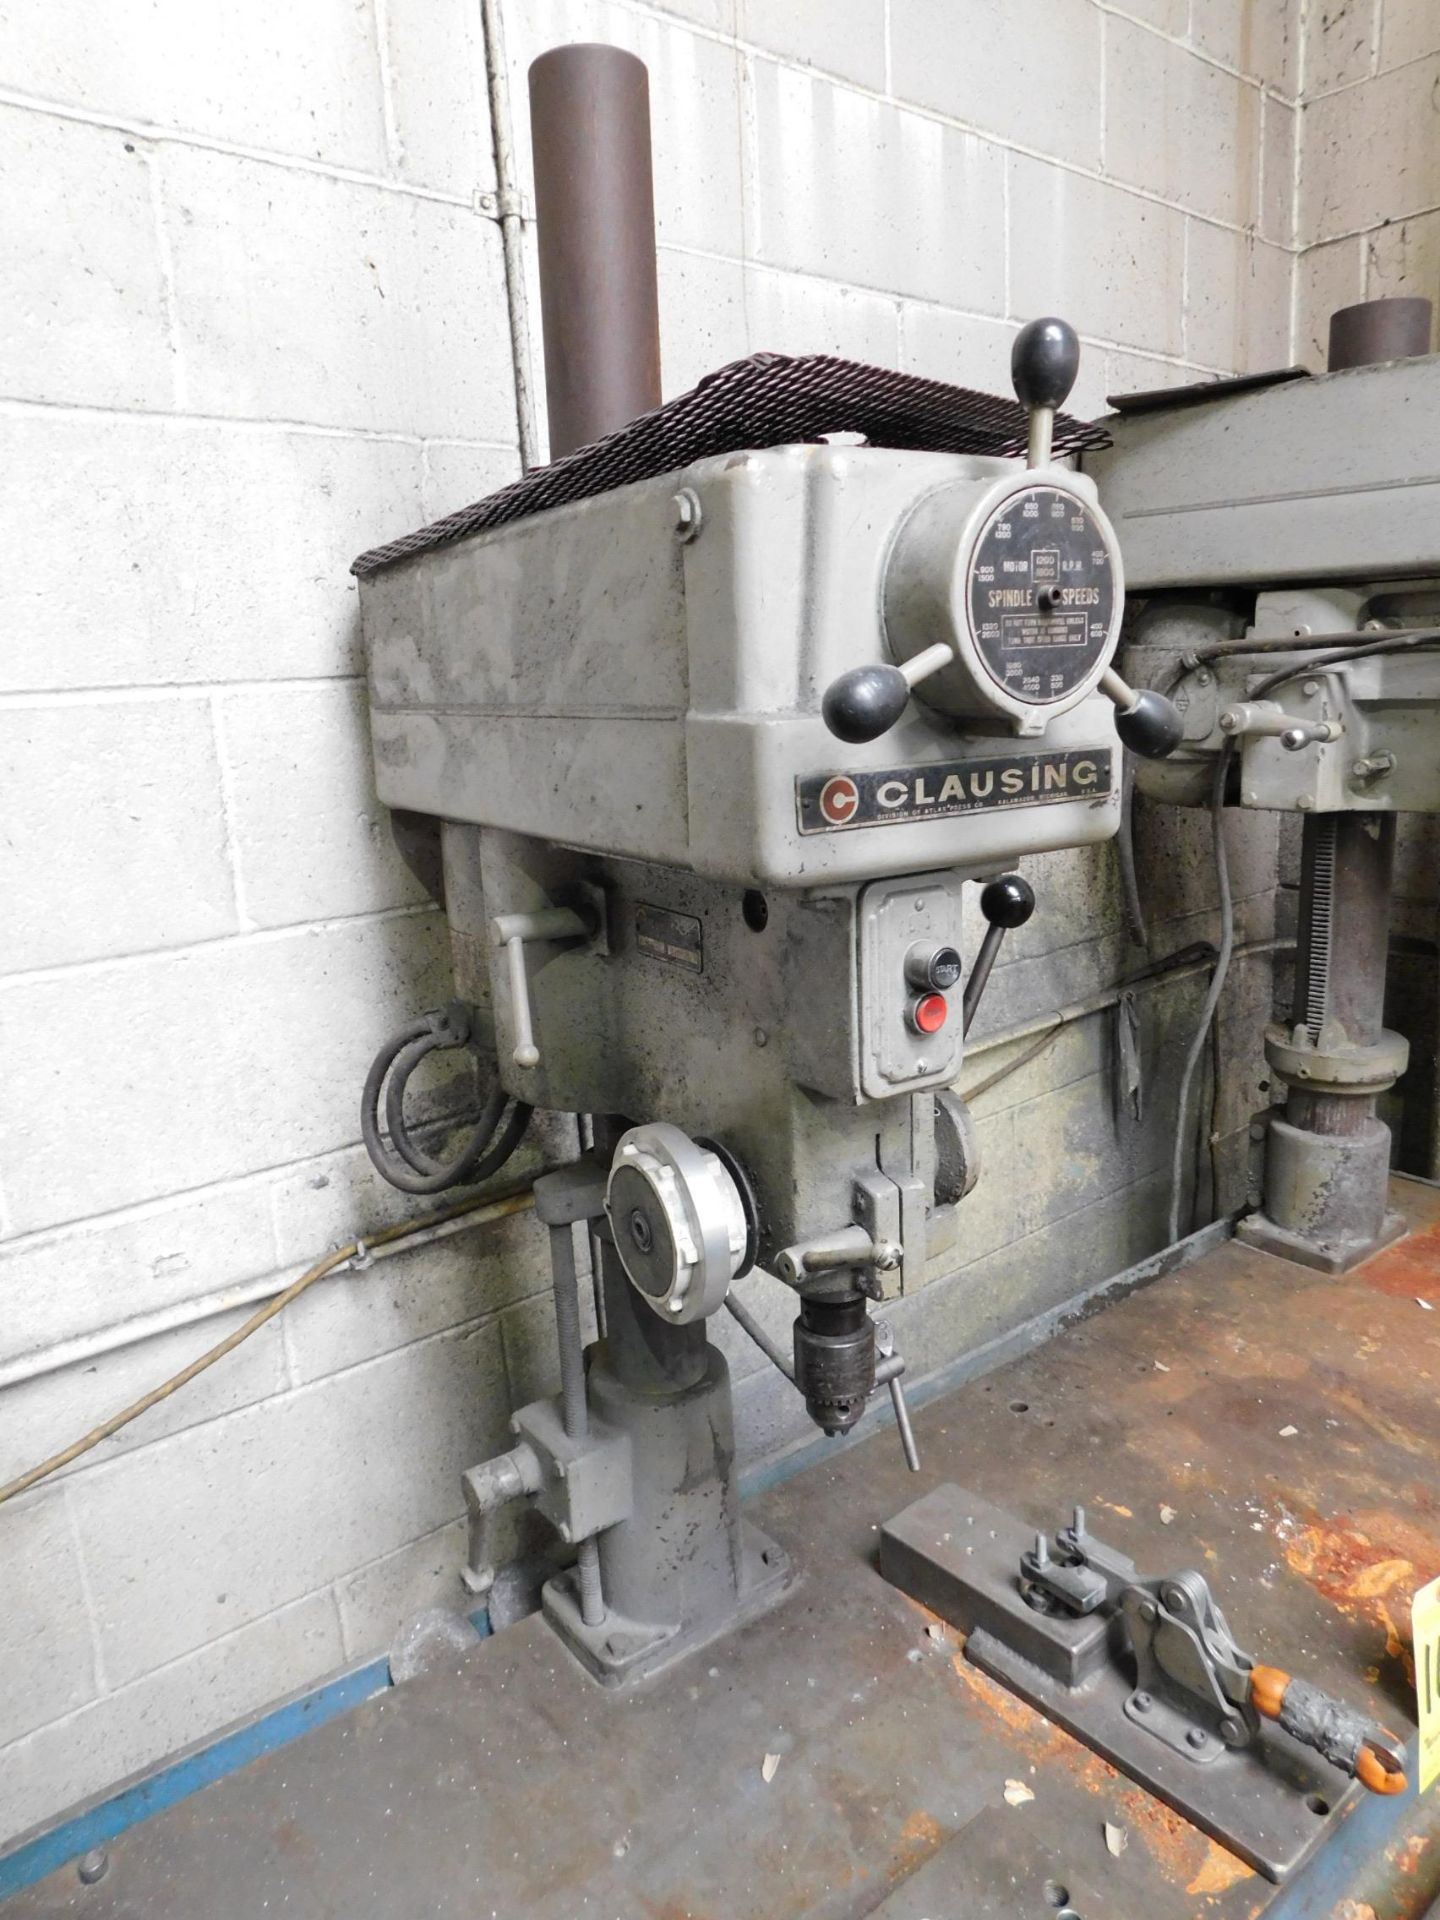 Clausing 2-Spindle Drill Press, (1) 15" Head, (1) 20" Head, Mounted on 20" X 72" Table - Image 2 of 7